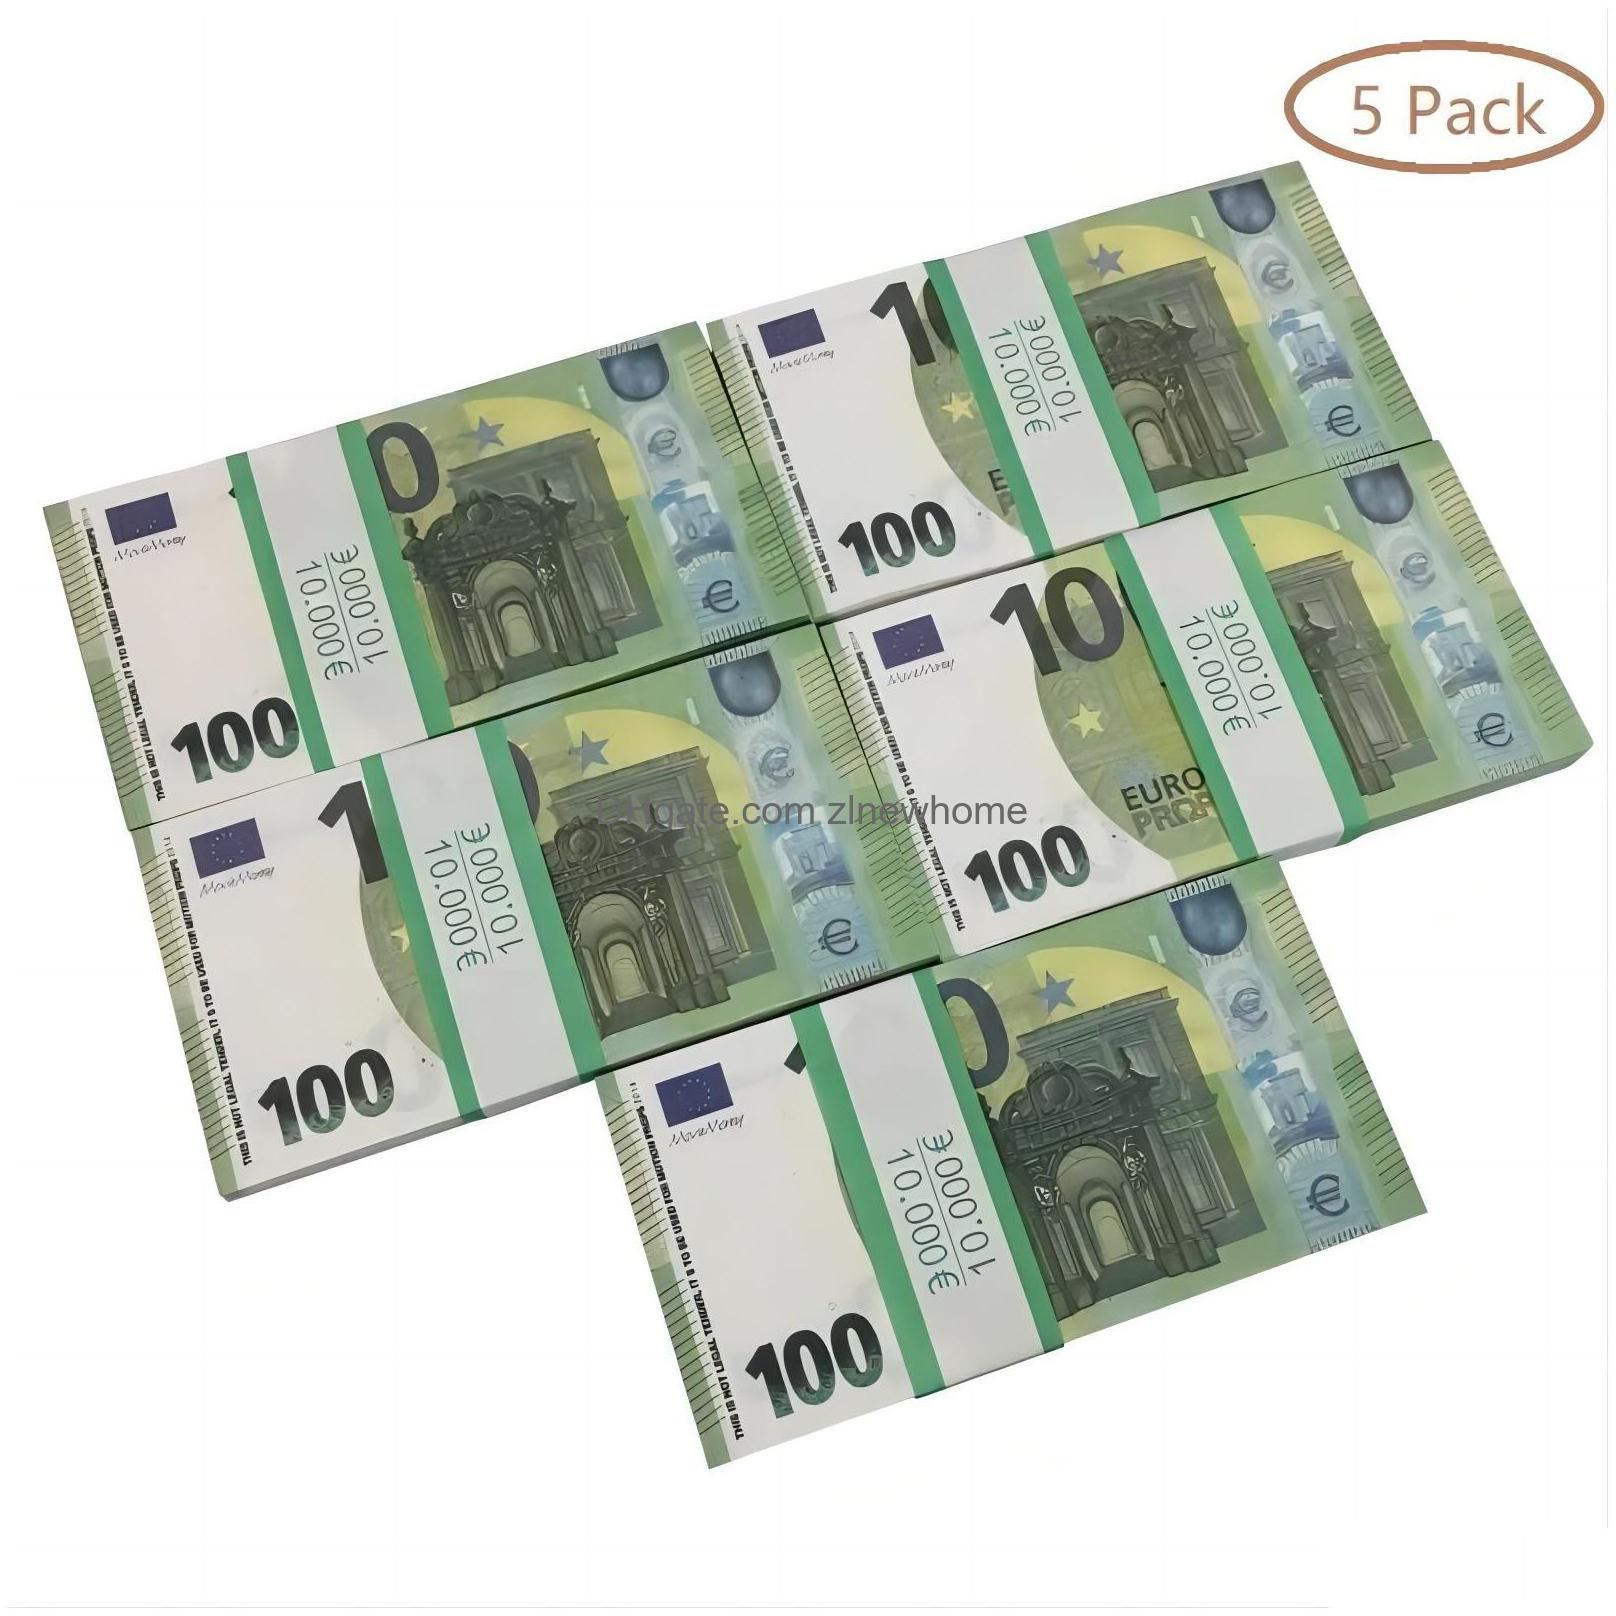 5pack 100 euro